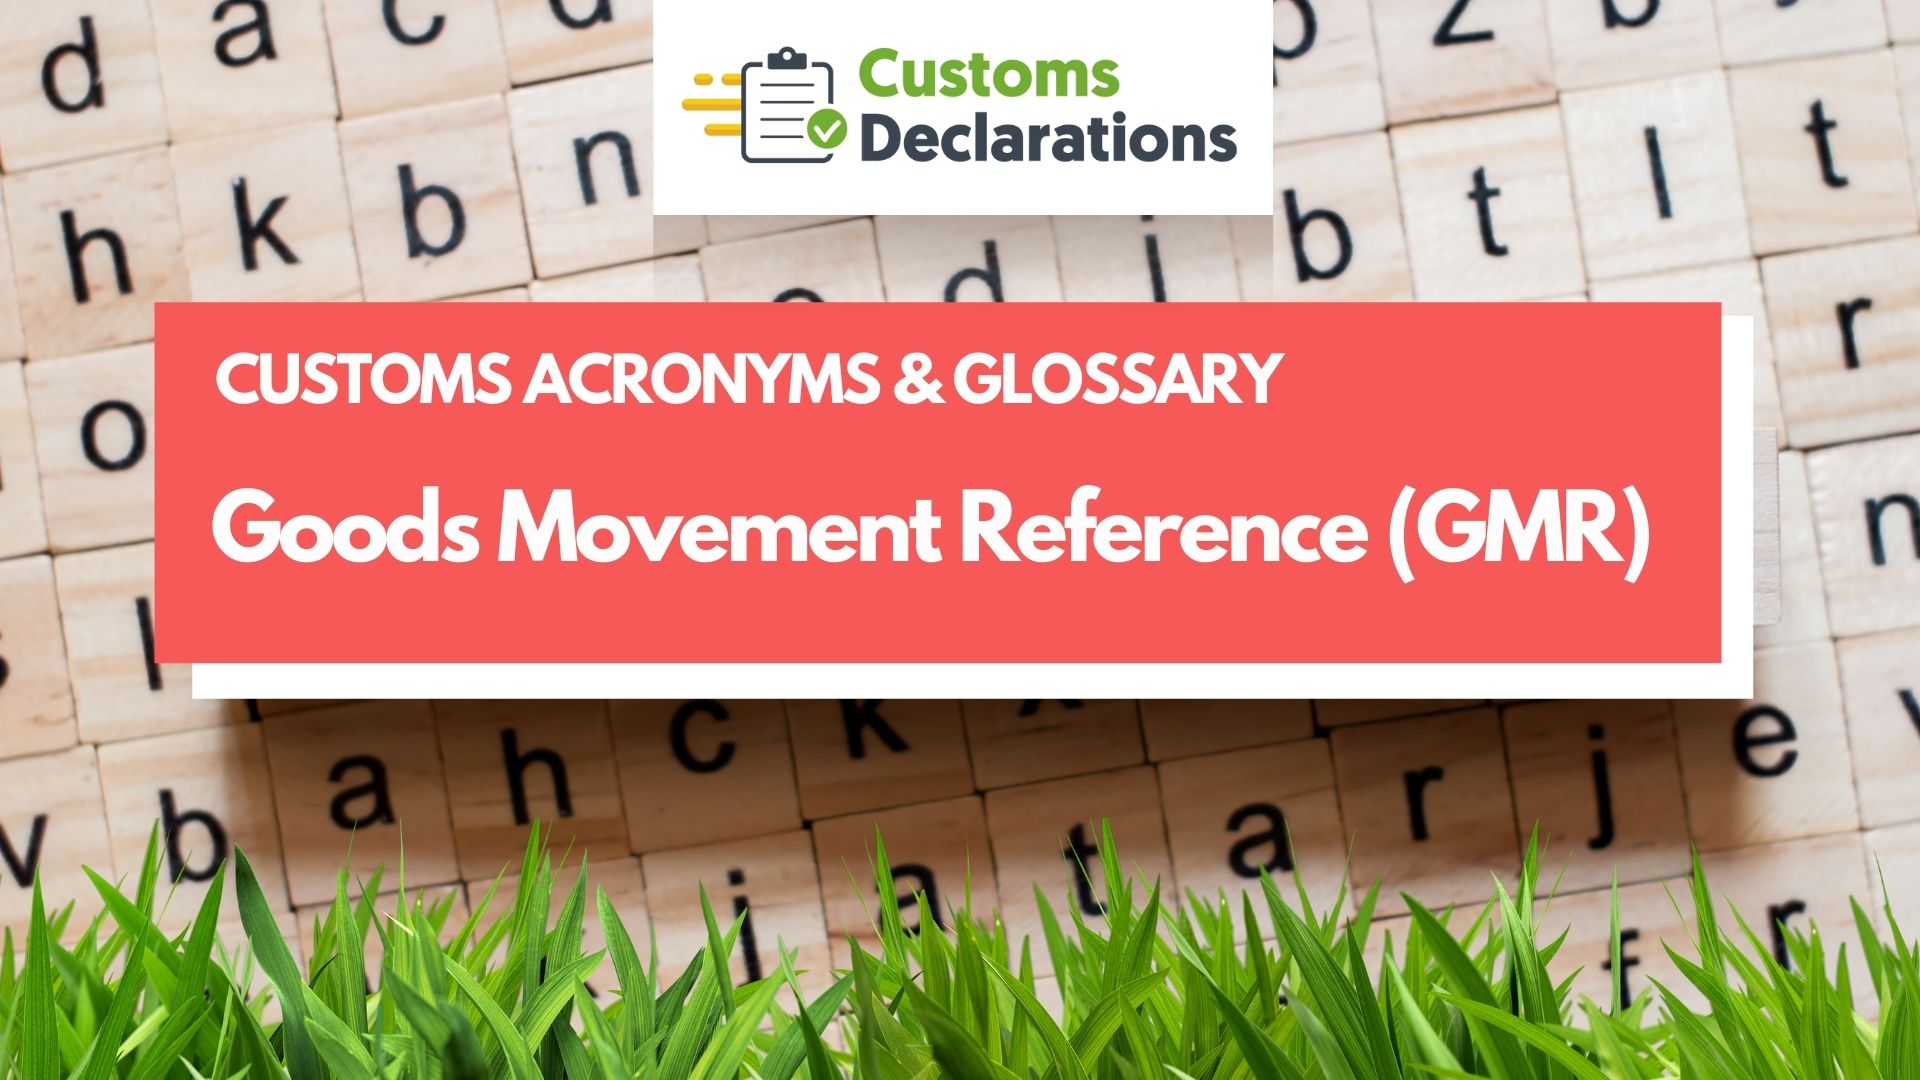 Goods Movement Reference (GMR) | CUSTOMS ACRONYMS & GLOSSARY